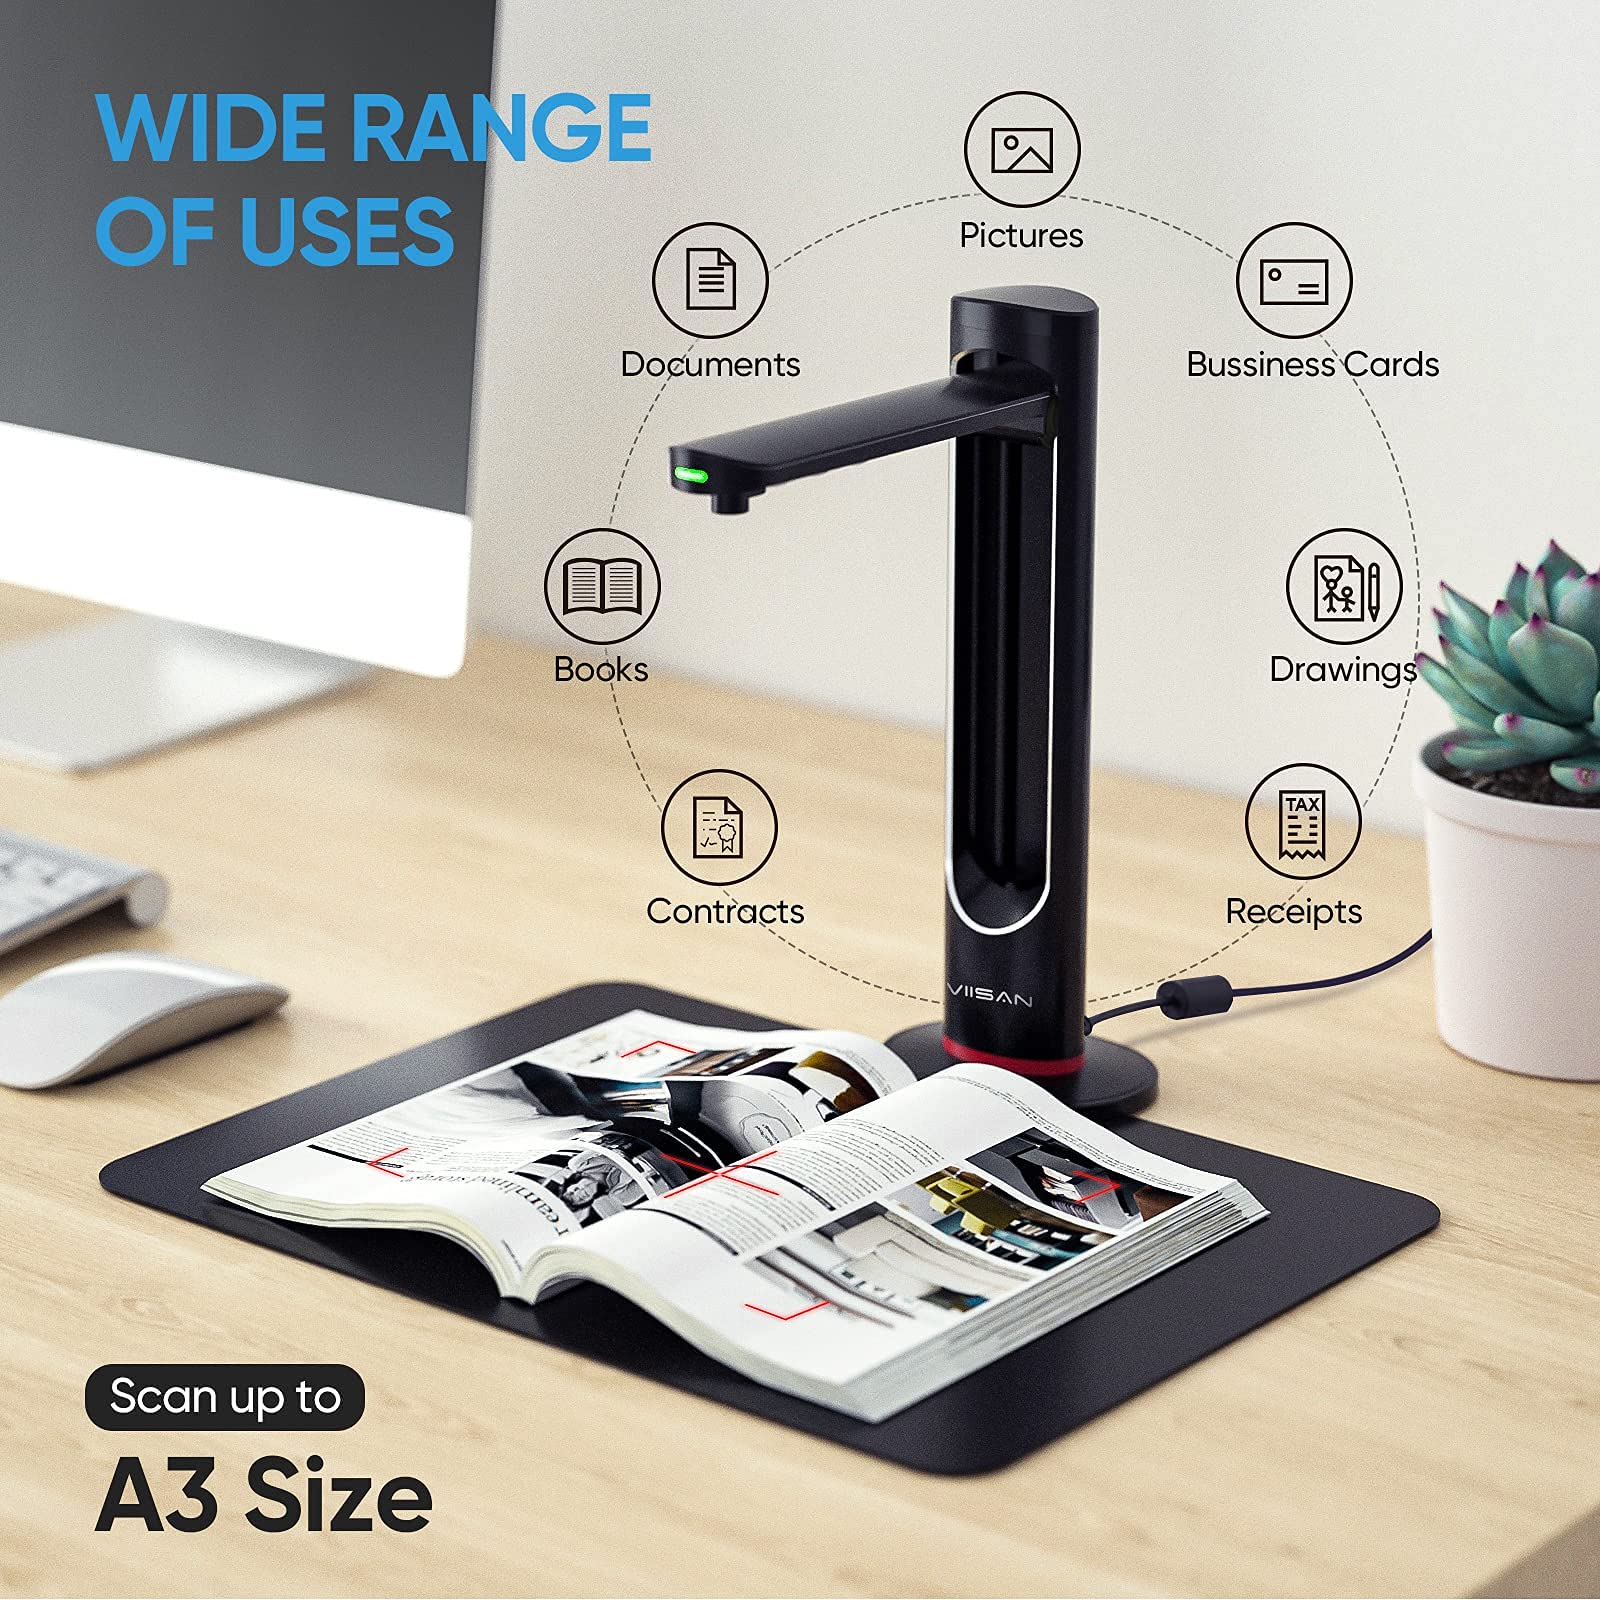 VIISAN K21, Portable USB Document Camera, 21MP High-Definition Book Scanner, Built-in LED Light, Capture Size A3, Auto- Flatten & Multi-Language OCR Text Recognition, Compatible with Windows & Mac